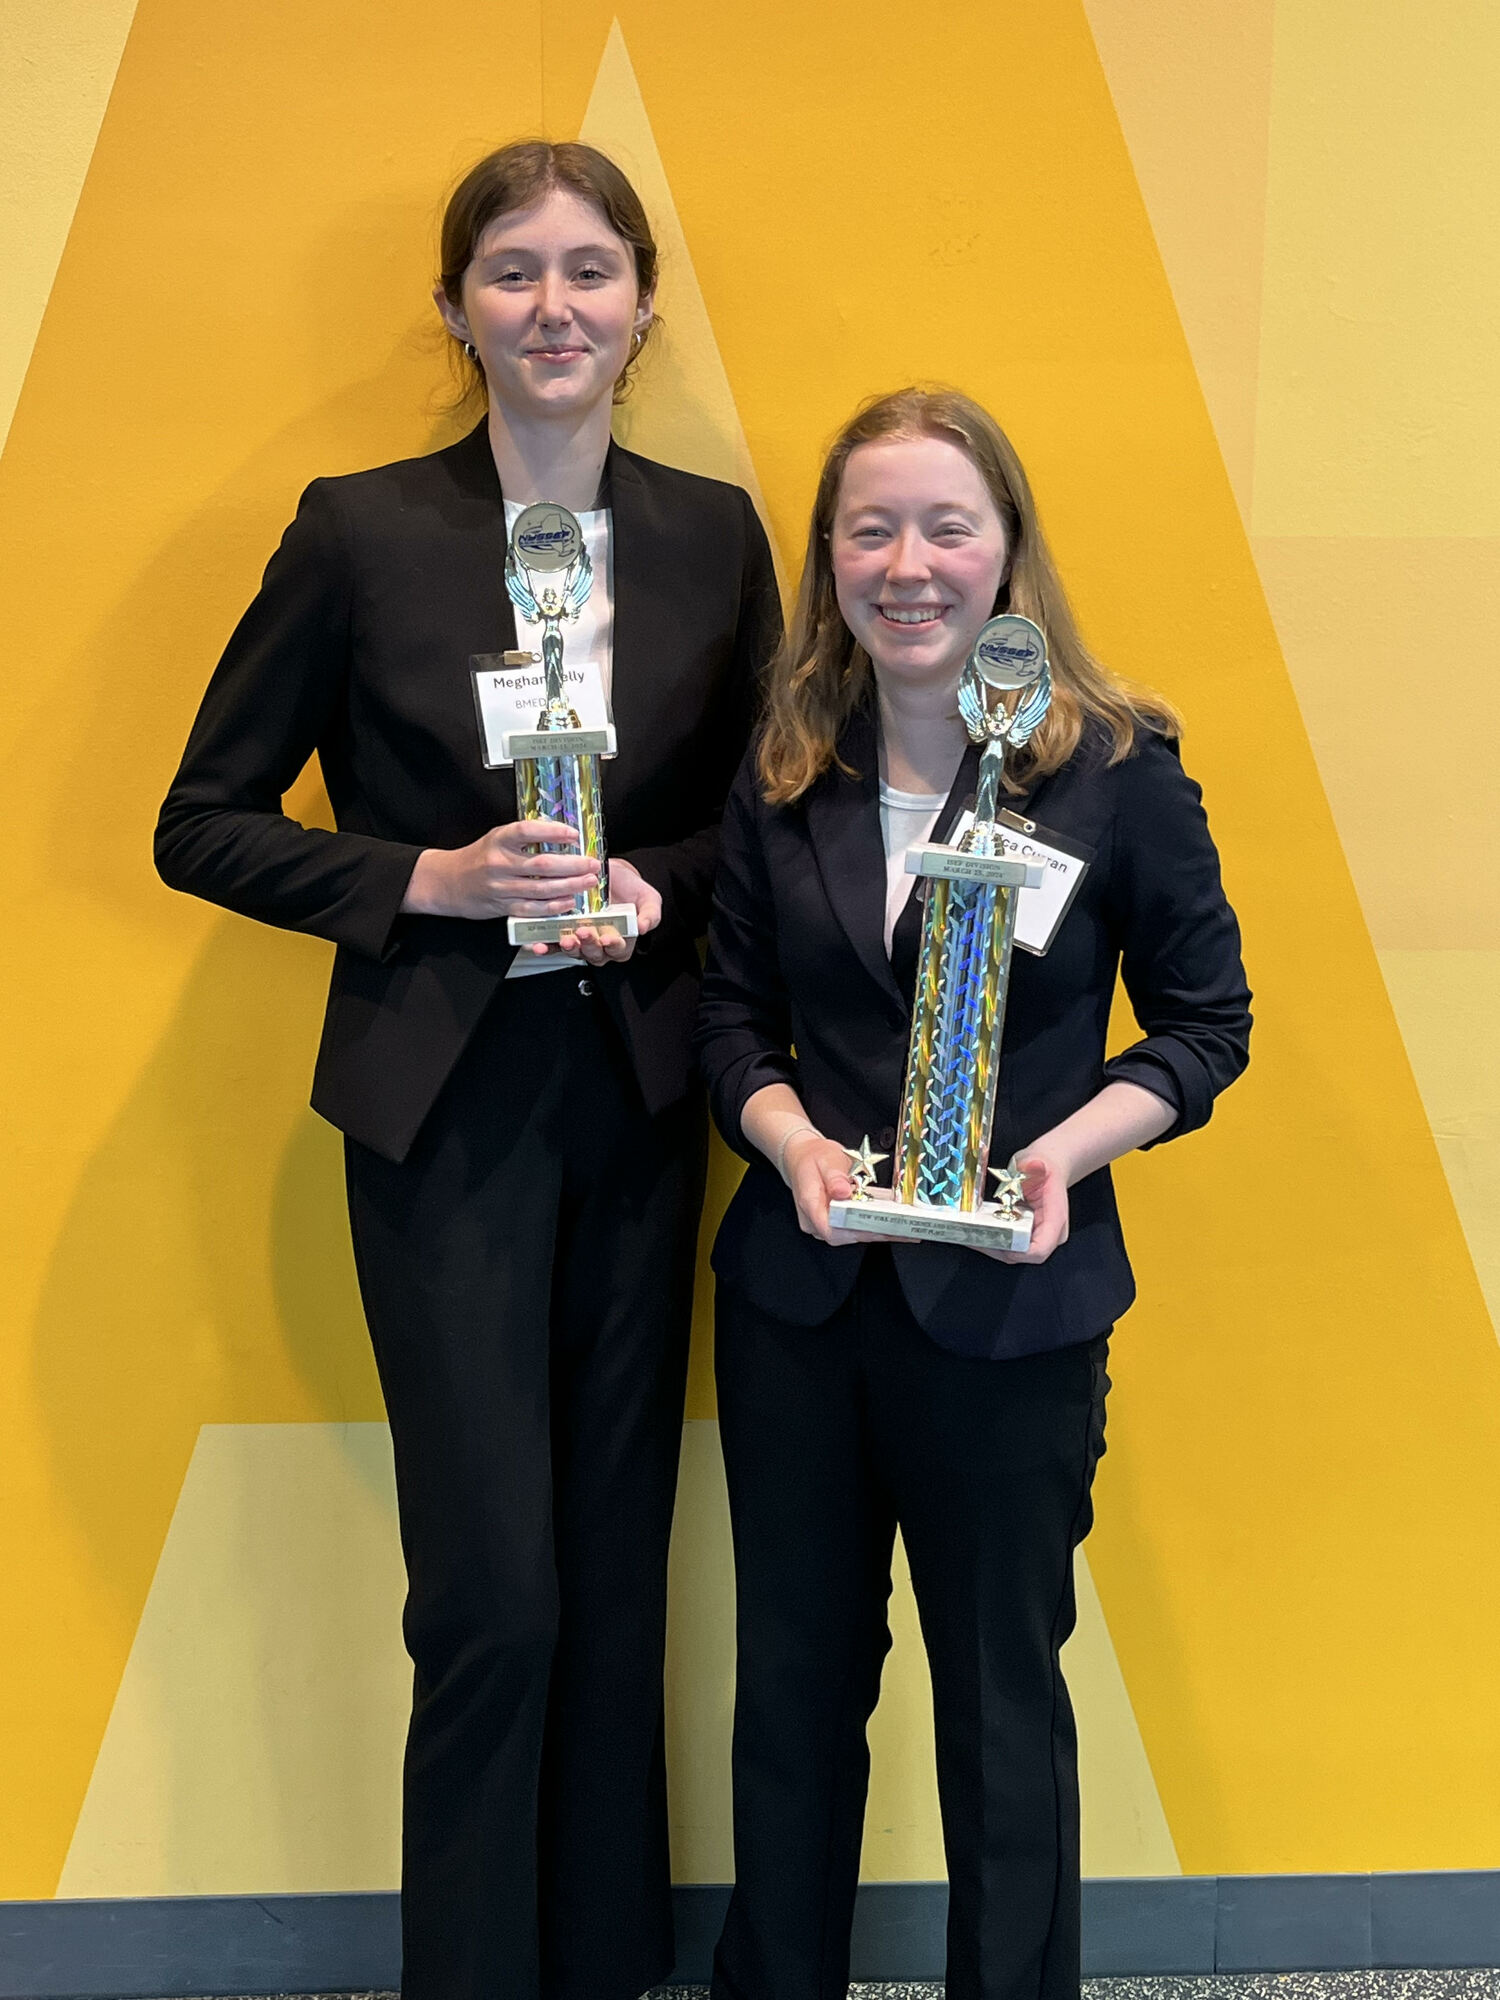 Westhampton Beach seniors Meghan Kelly and Jessica Curran presented their research projects at the New York State Science and Engineering Fair March 27. WESTHAMPTON BEACH SCHOOL DISTRICT